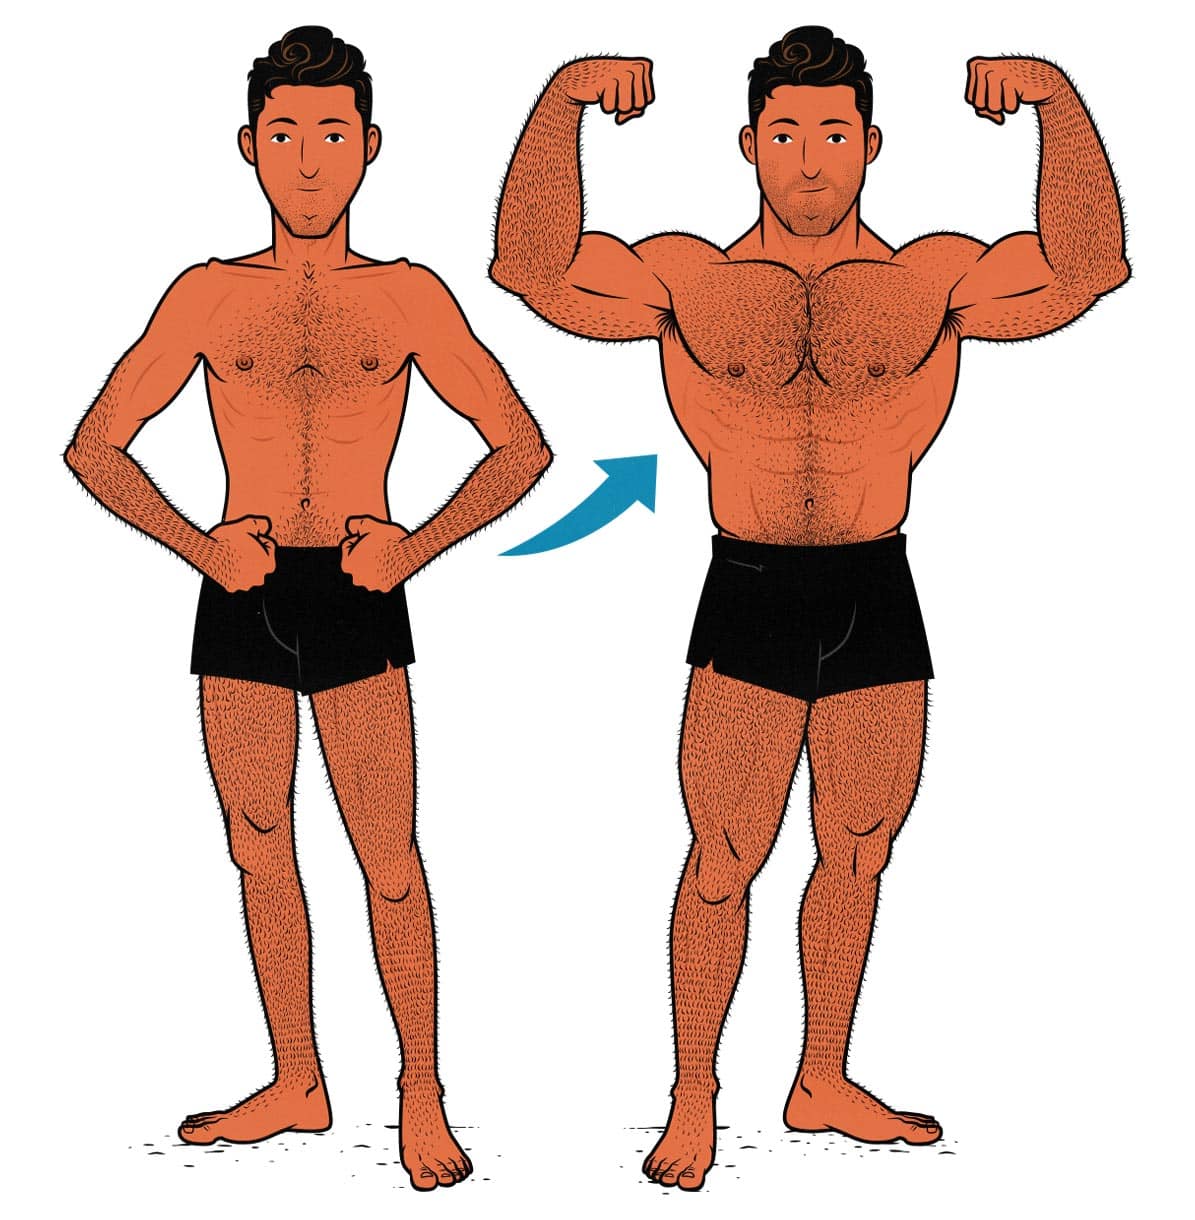 Illustration of a skinny guy gaining weight and building muscle by following a bulking diet plan.